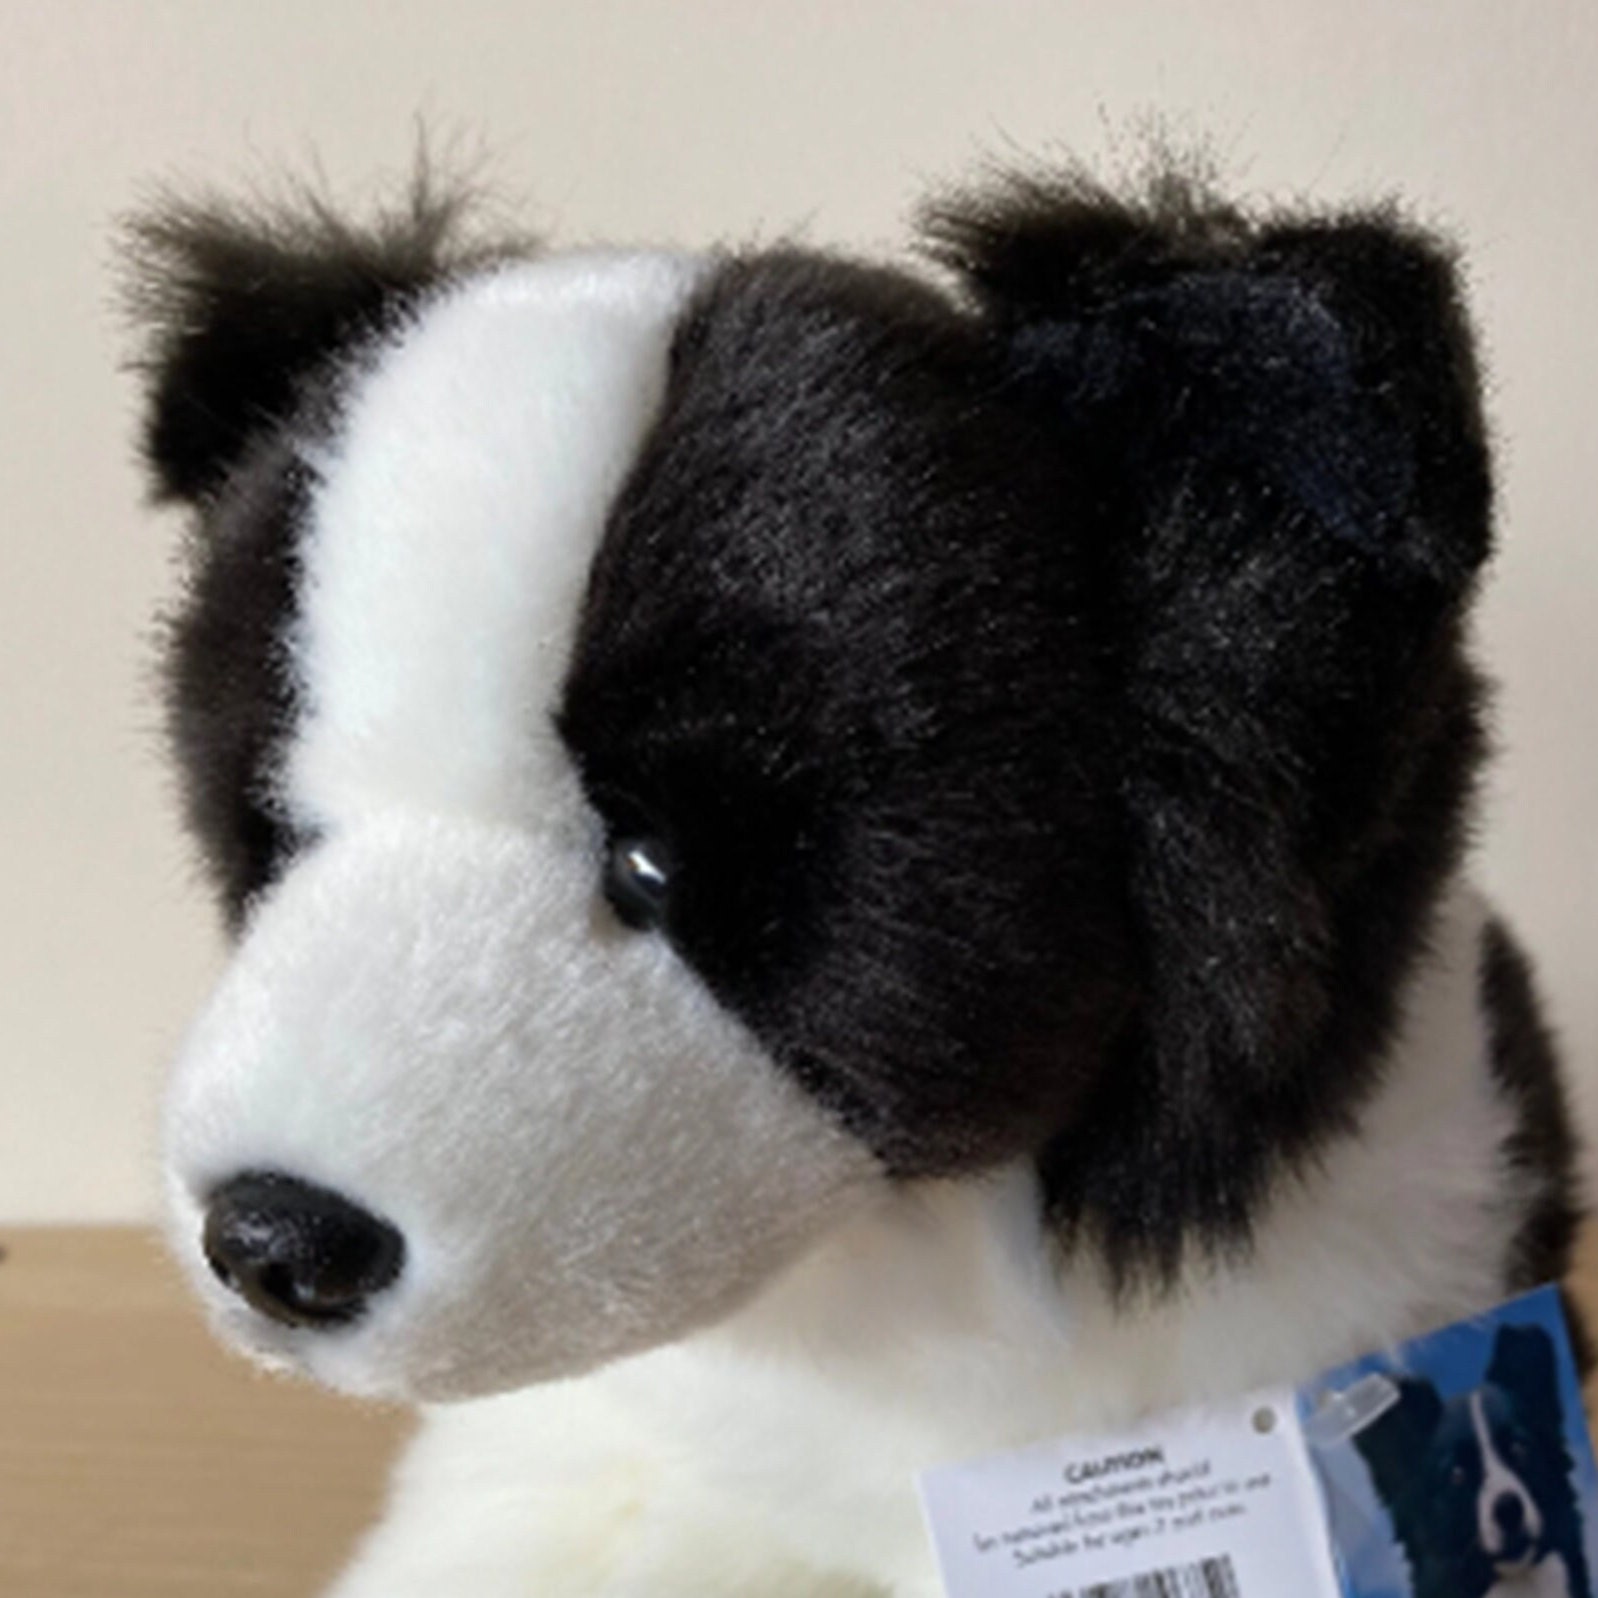 Cuddle Puppies Border Collie Plush Soft Toy Dog 22cm Stuffed Animal by Keel  Toys